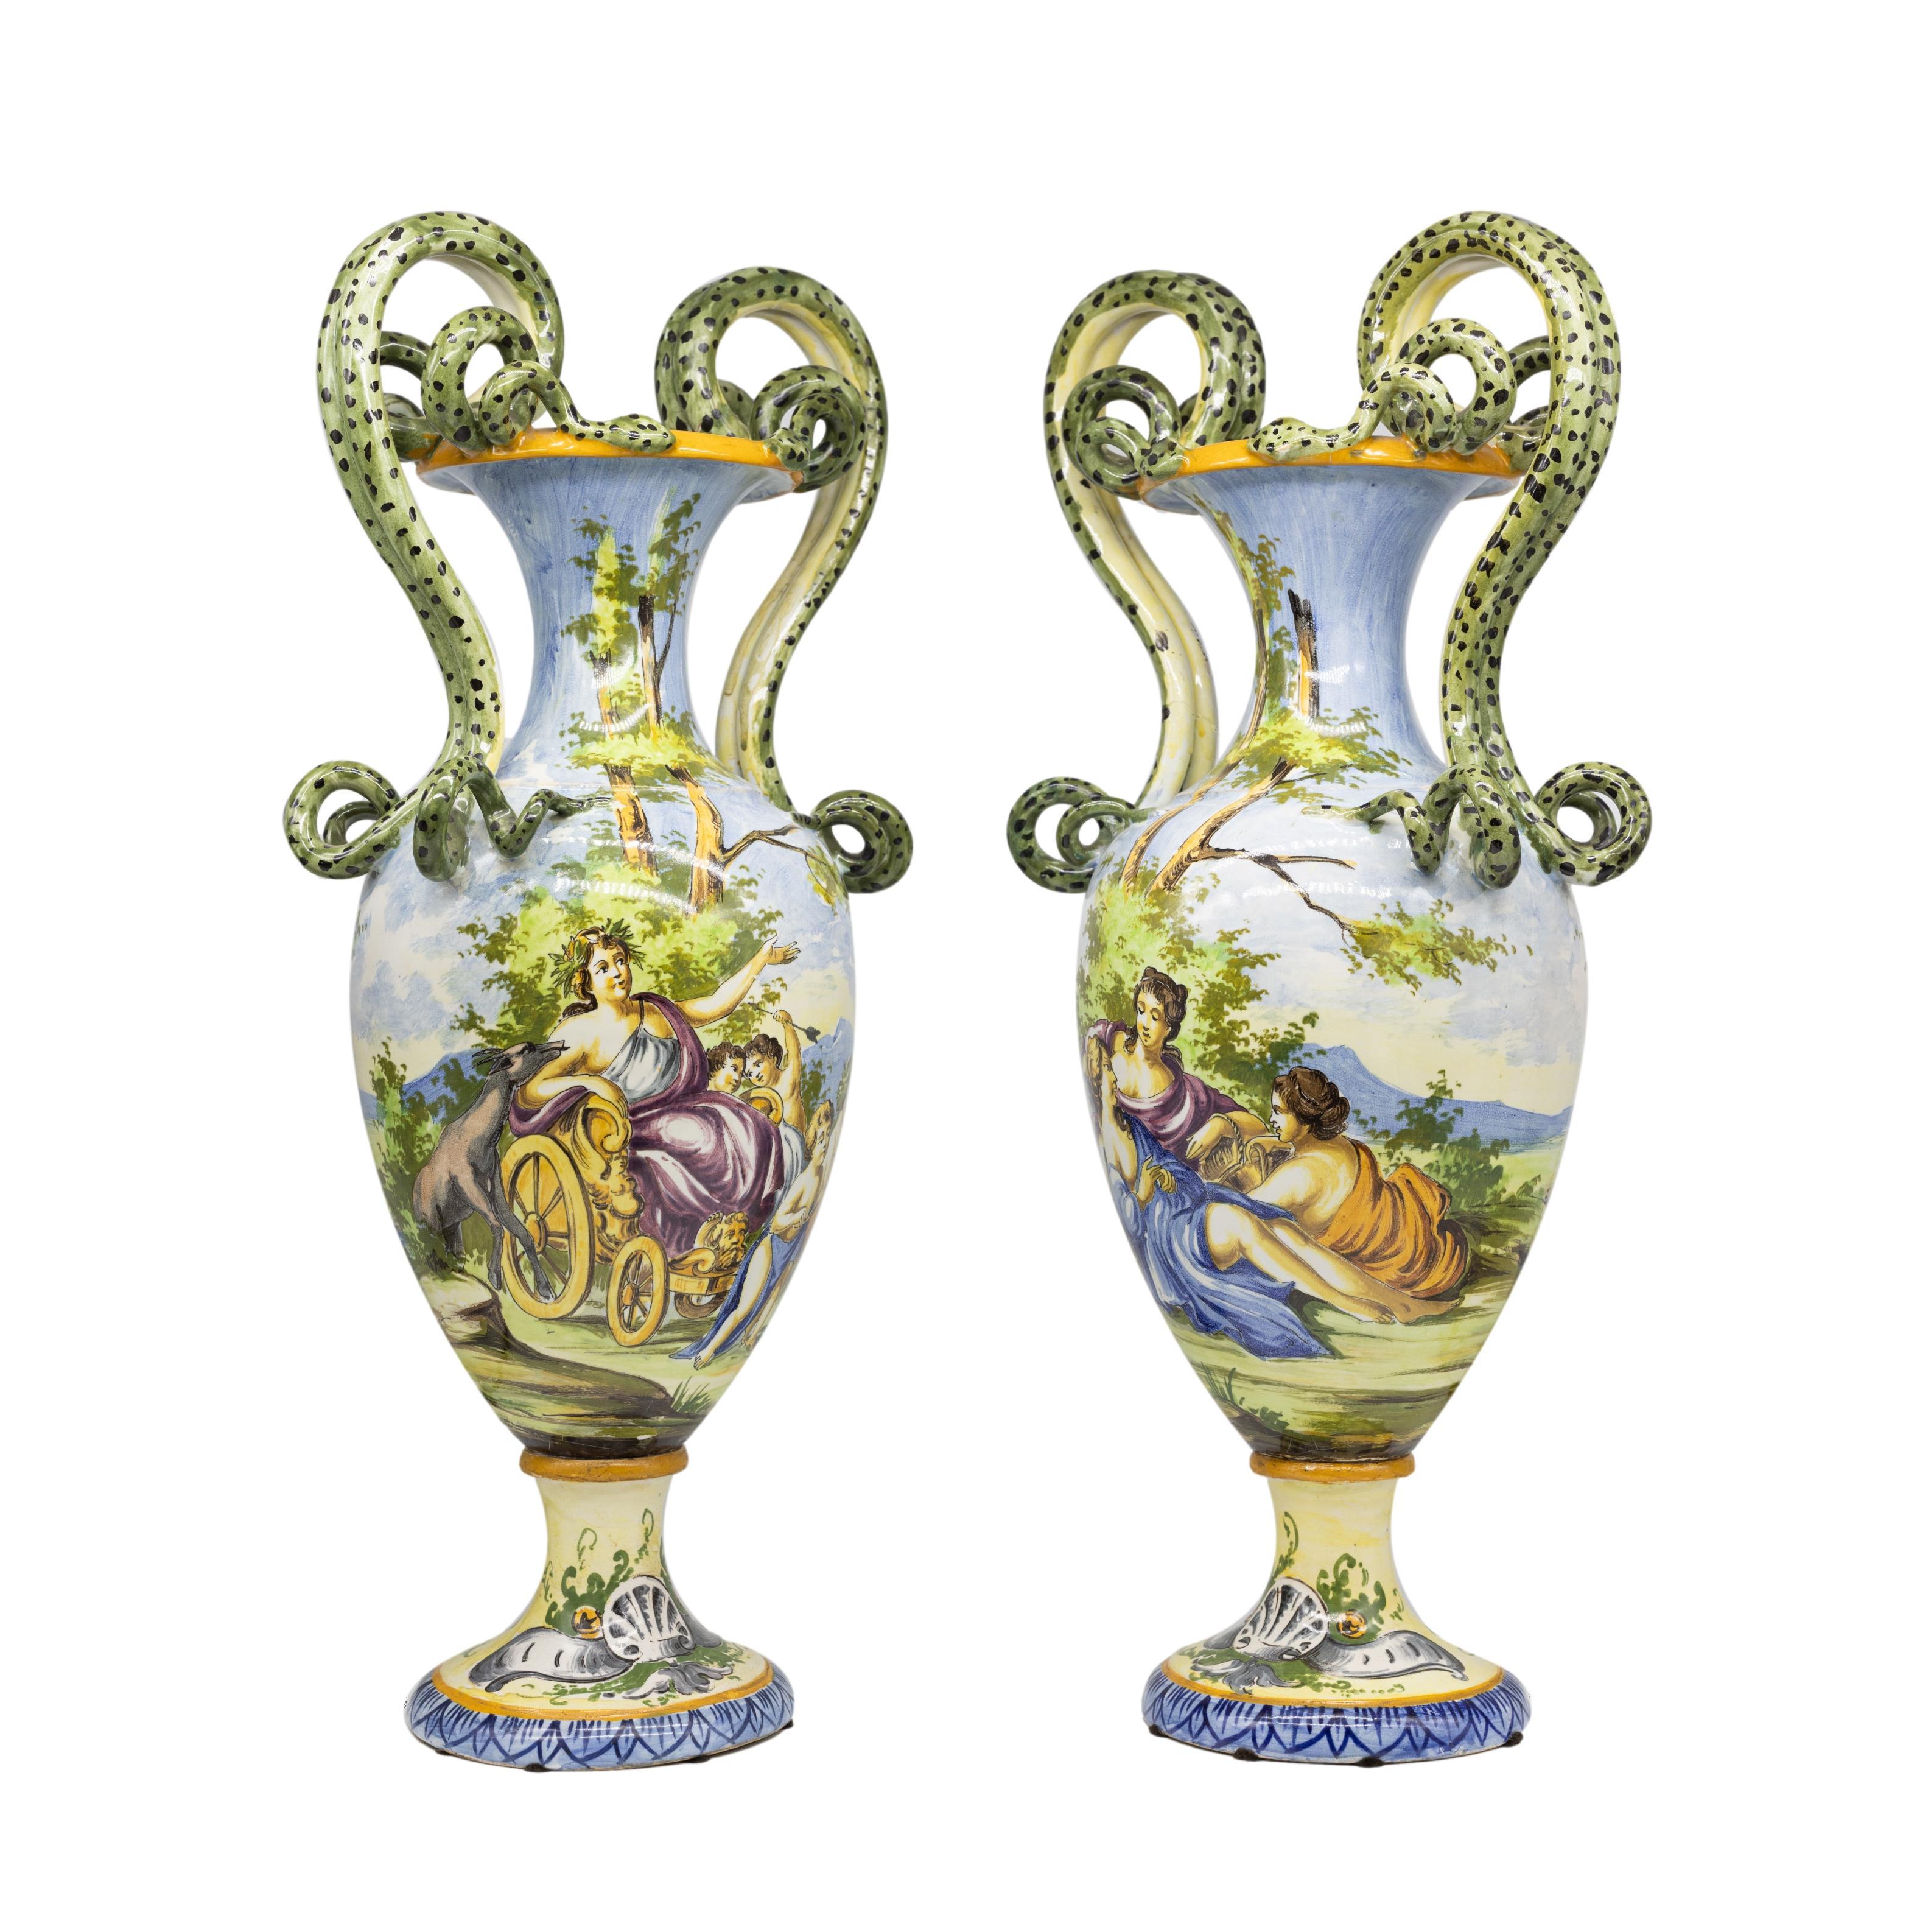 Pair of Italian Maiolica Vases, of baluster form, with polychrome Renassance style decptions, on pedestal bases, with large molded and applied snakes forming the handles, the reverse with Capodimonte mark for 1830-1890, ca. 1880. 
An impresseive